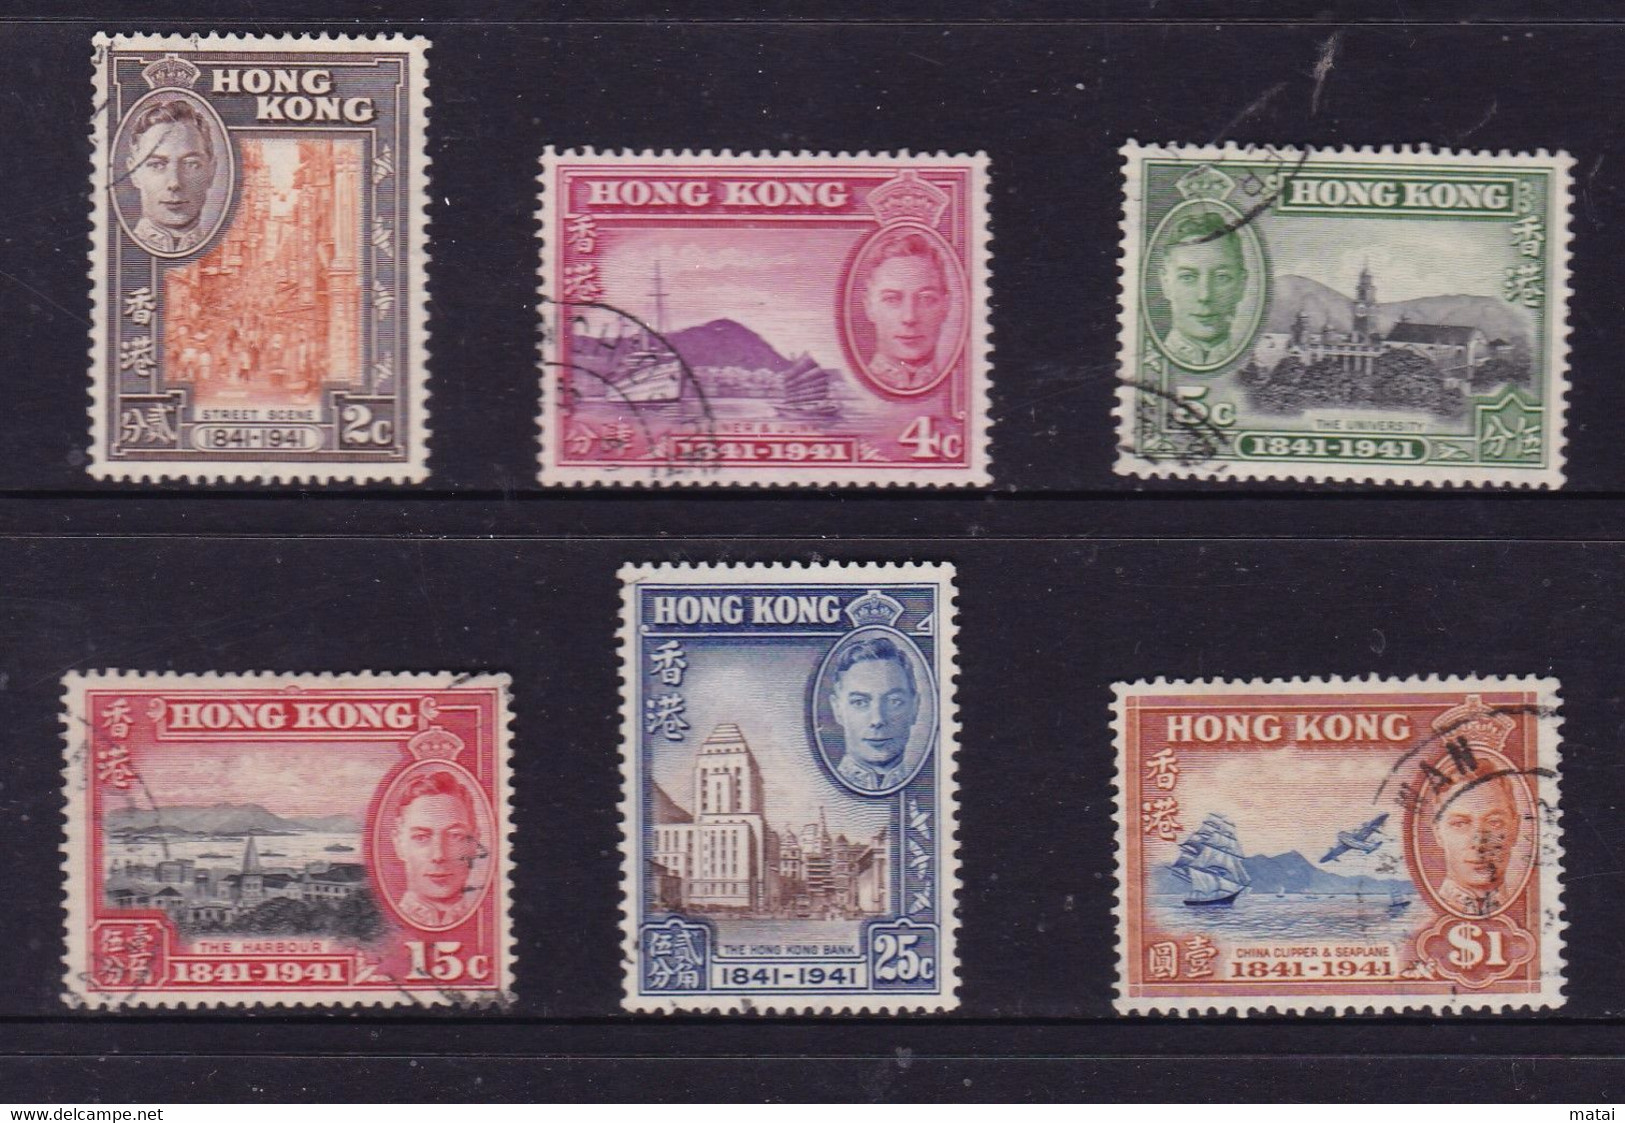 HONG KONG 1941, "Centenary Of British Occupation", Serie Cancelled, Very Light Trace Of Hinge - 1941-45 Occupation Japonaise